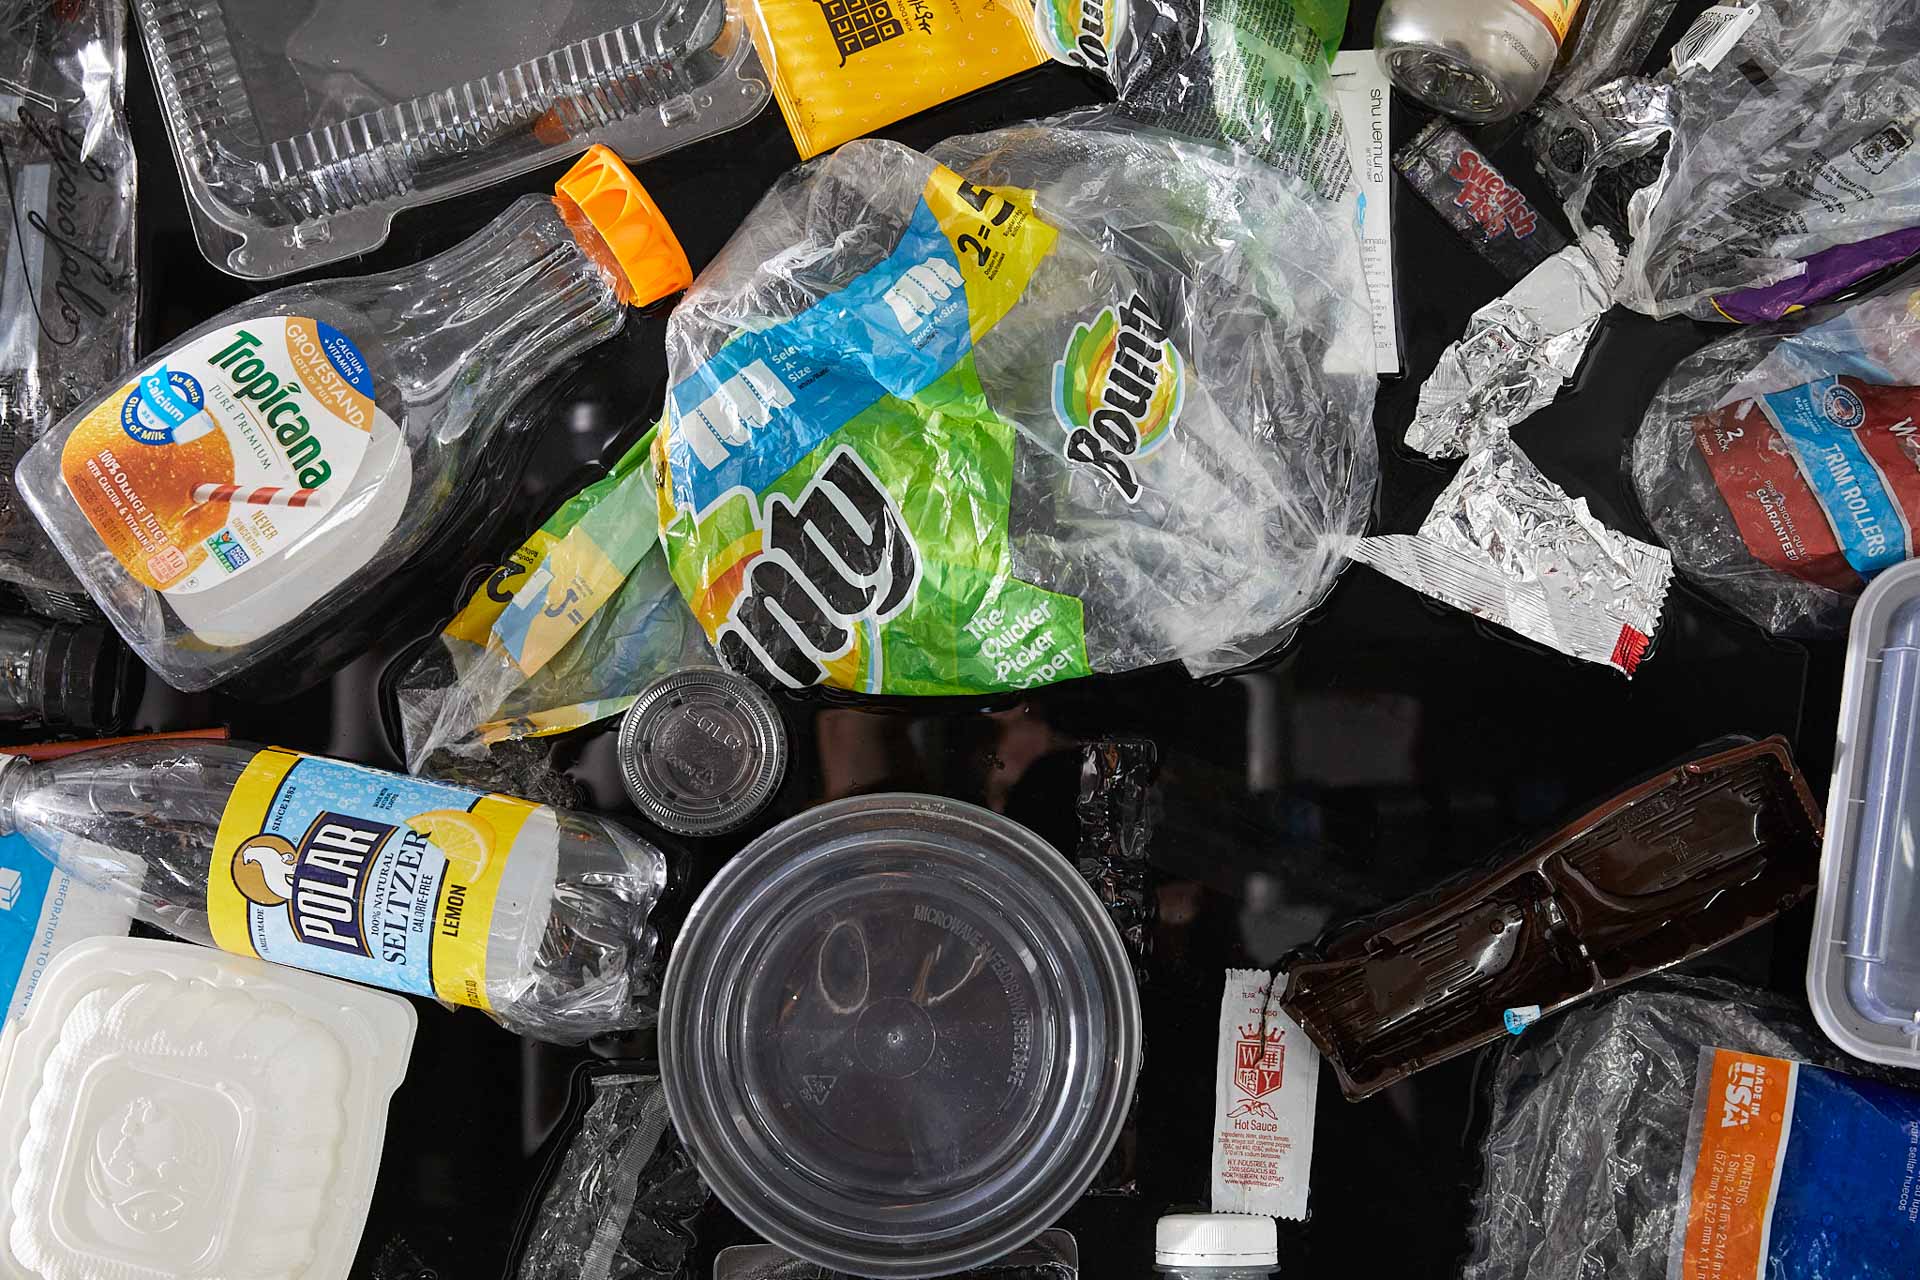 Small thumbnail image of Tight close-up photograph of about 20 single-use plastic items jumbled together. Most prominently featured is a Bounty plastic package wrapping, a Tropican organge juice bottle, and a circular take out container.